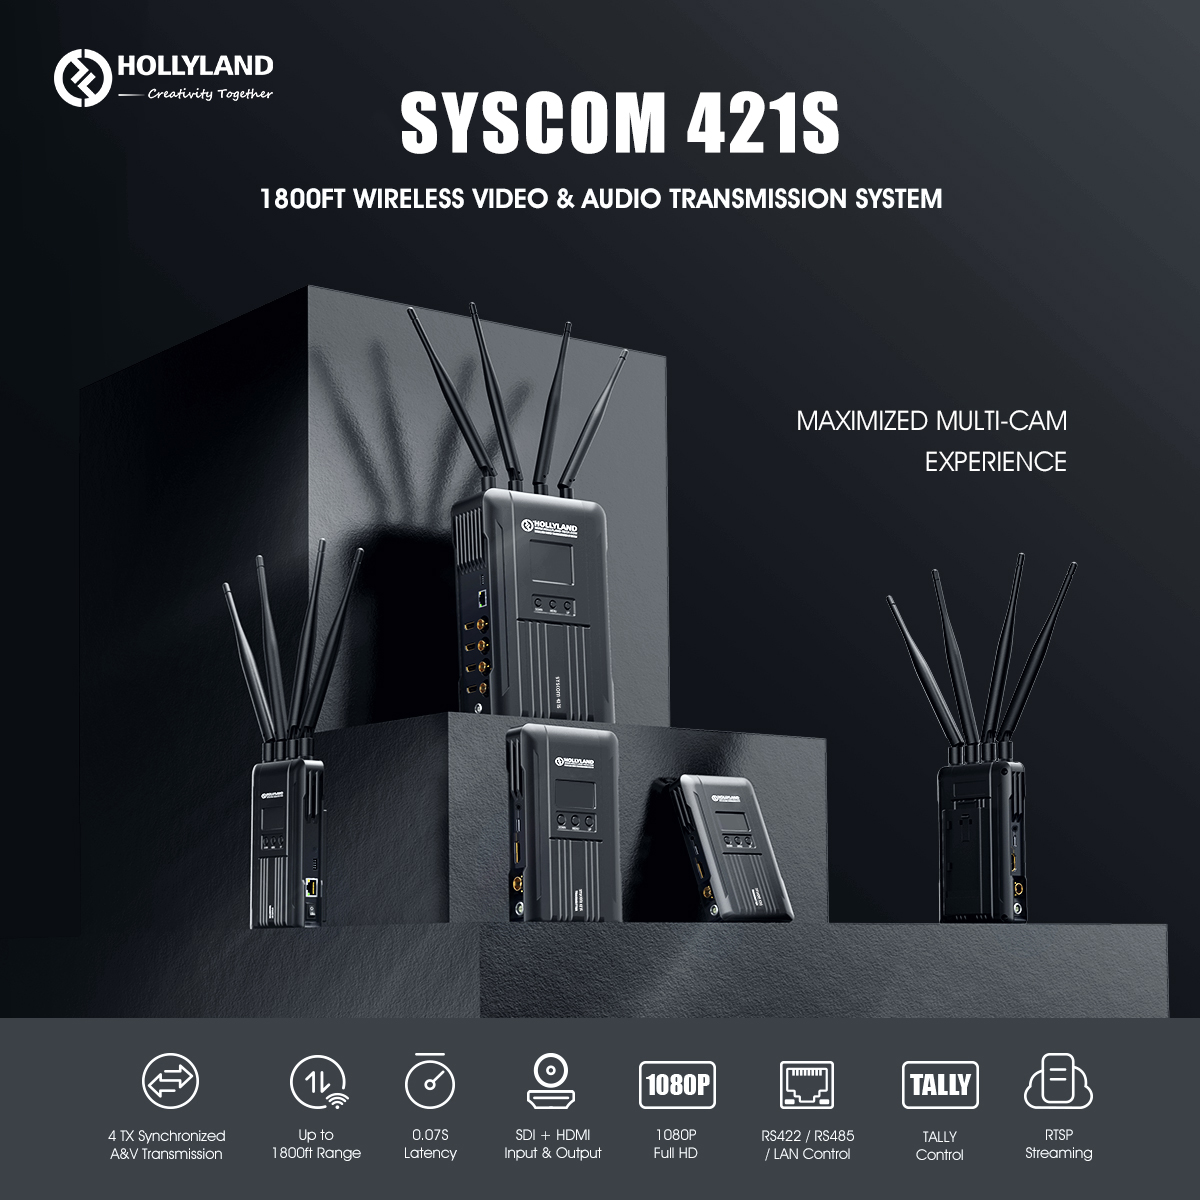 Hollyland Syscom 421S Wireless Audio and Video Transmission System